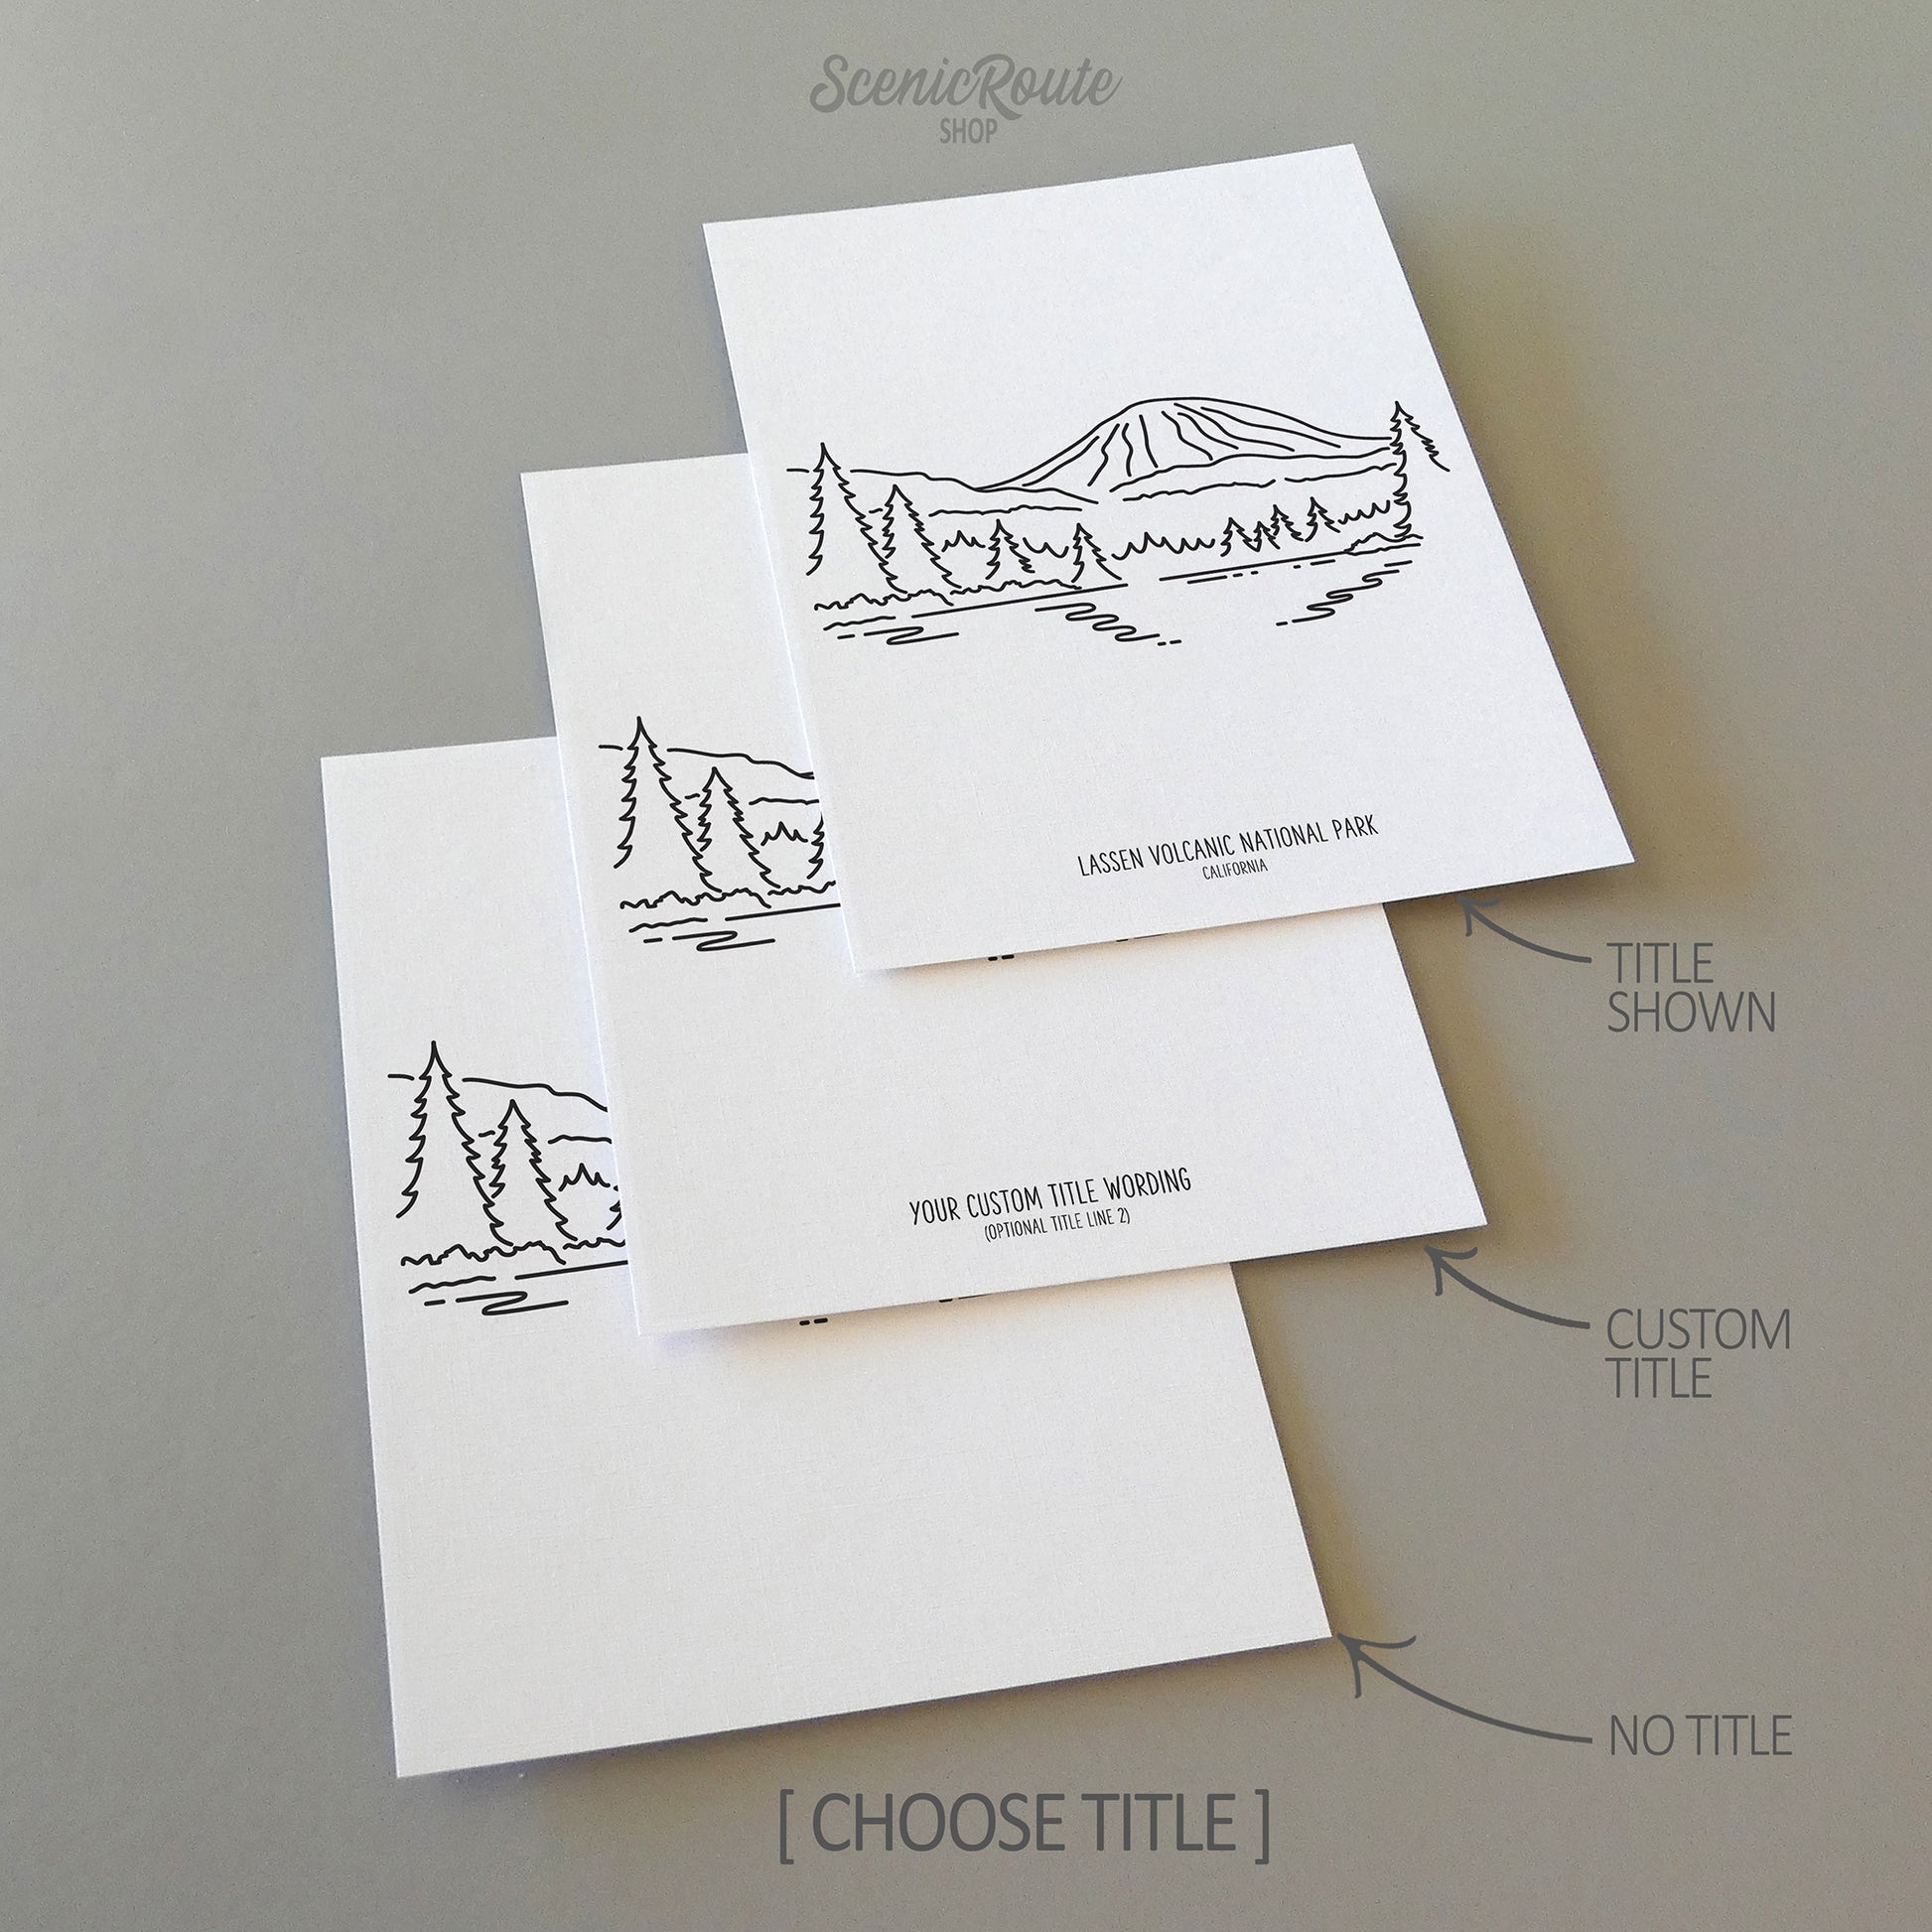 Three line art drawings of Lassen Volcanic National Park on white linen paper with a gray background. The pieces are shown with title options that can be chosen and personalized.